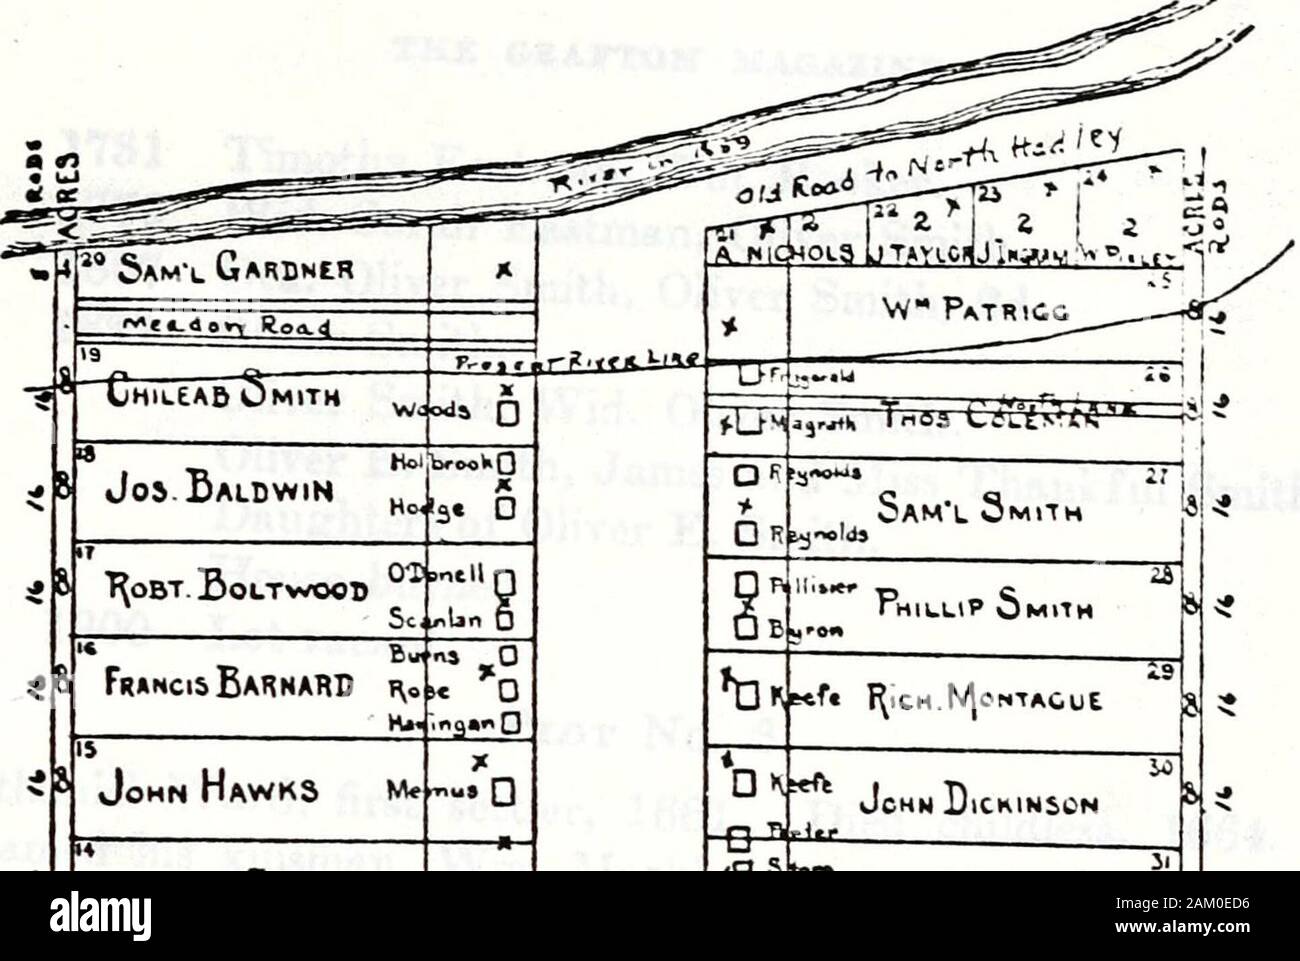 The Grafton magazine of history and genealogy . D. D. L. Rev. Francis Danforth. Dea. Charles Hitchcock. ^ Daniel Cook, Sr. ^ Mrs. Daniel Cook. • -i 1900 Daniel Cook, Jr. t &gt; 1900 House vacant. ^ House in the street on River BankSamuel D. Ward, Postmaster. ^. John Nash, Obed Newton. ? . Capt. John Nash. ^^ ^ Obed Newton, Frank Pierce. ,, Tenants. ...• .   .. f^   Plot No. 2. ^ Markham family. William Markham. Bom 1621. Died 1690. Married 1st dau.Geo. Graves. Married 2d dau. Gov. Webster. Children: ^^^ V Priscilla, married Thos. Hale. William, slain by Indians at Northfield, 1675. Lydia, marr Stock Photo